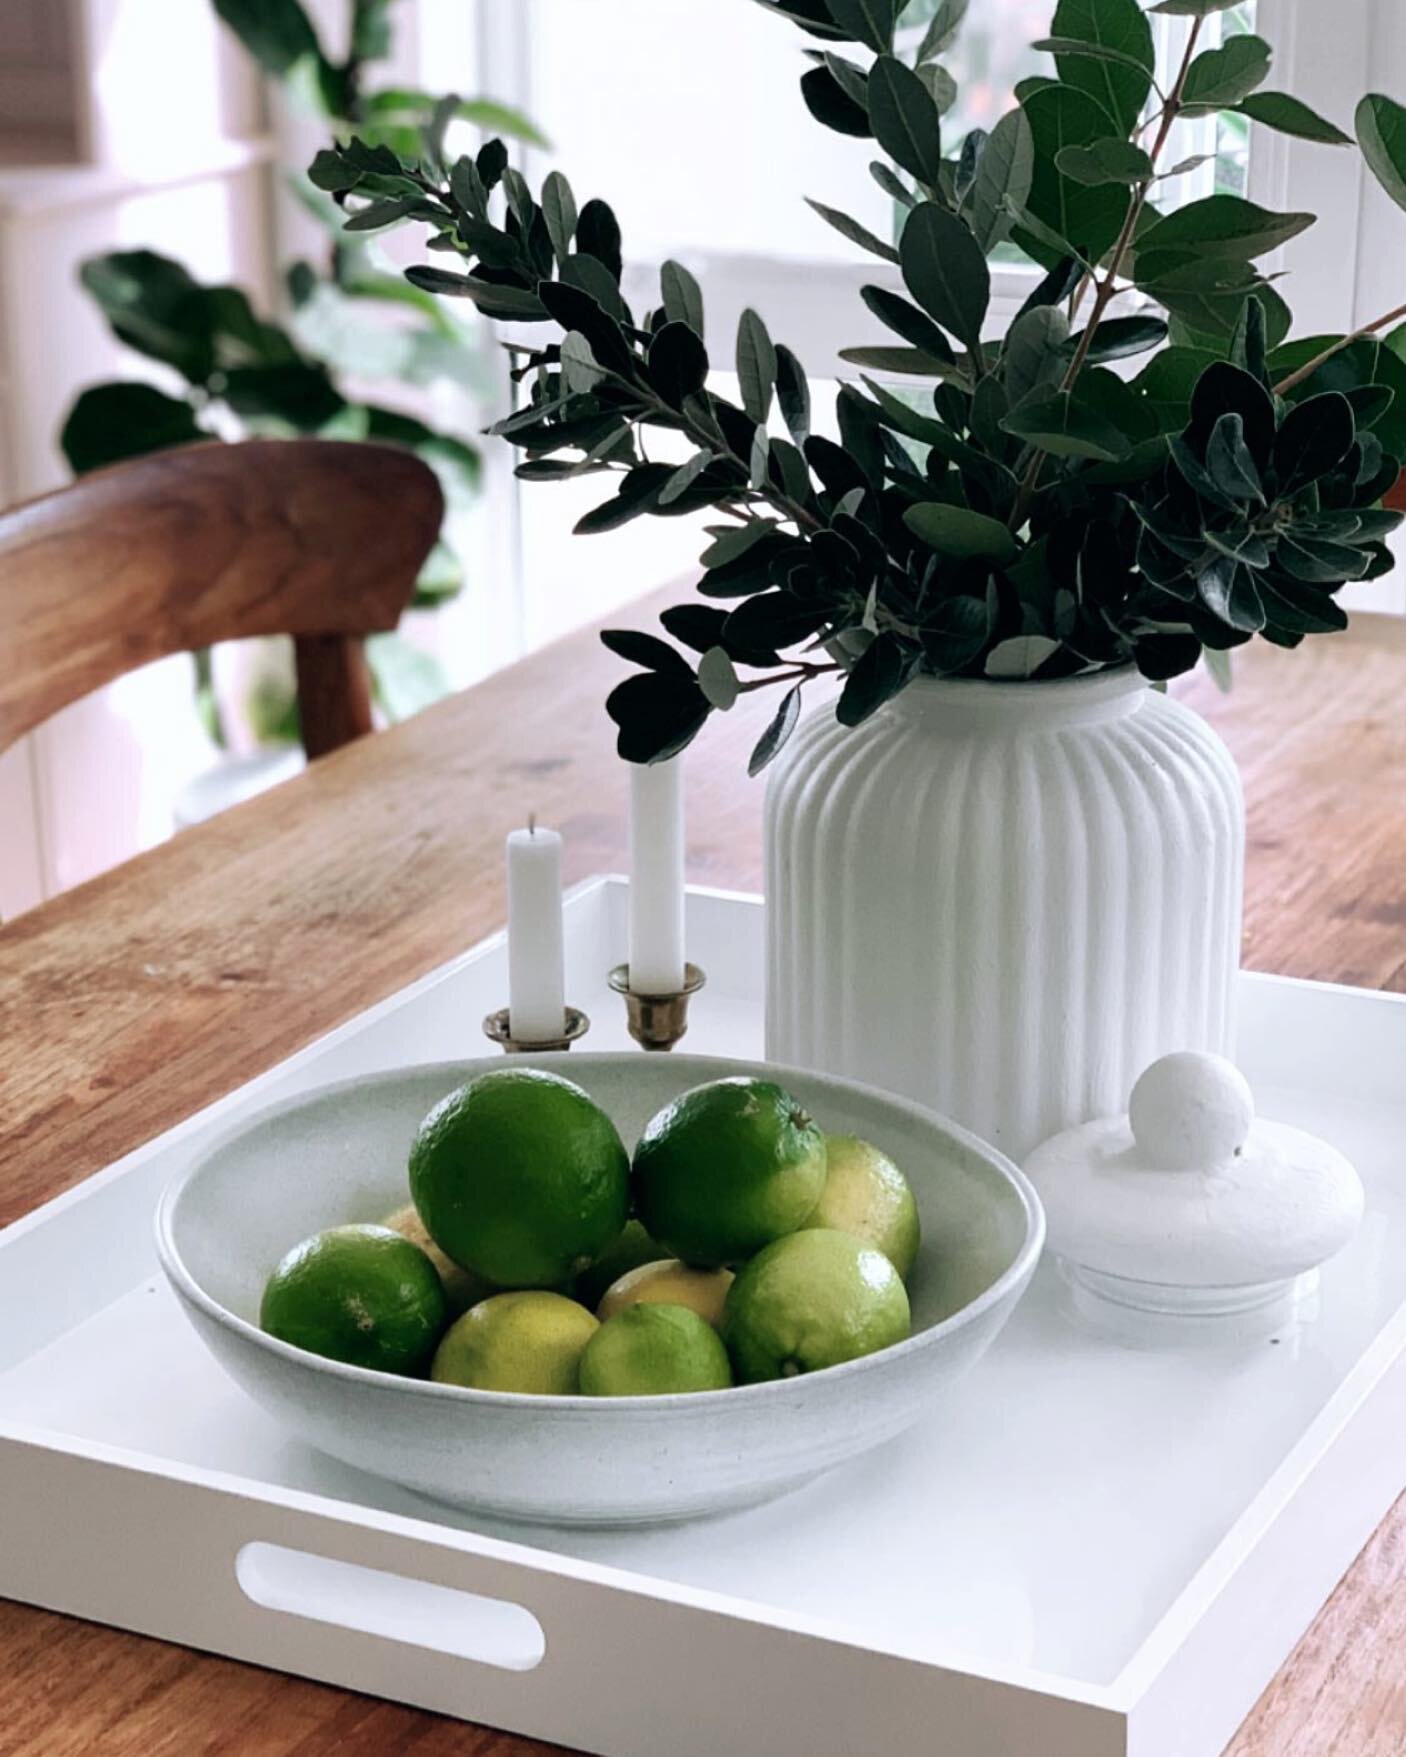 I raided the garden today to put together this simple dining table display on my new @freedom_nz Lacquer White Tray.  Feijoa leaves and limes off the tree, then added a bowl I used for serving and a glass vase which I have previously painted white to